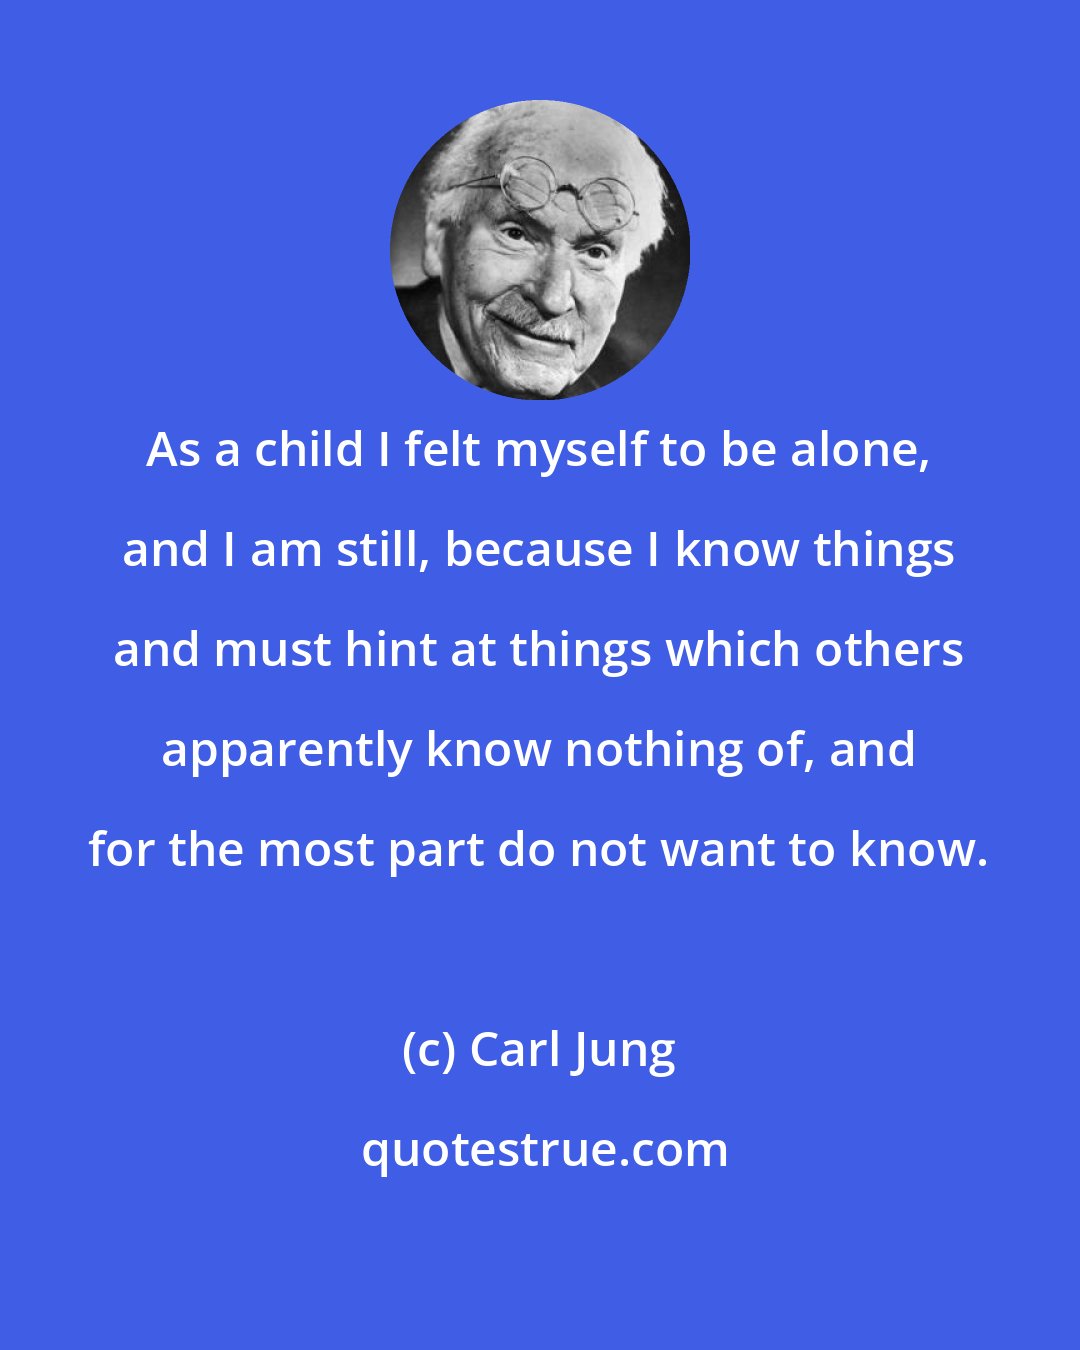 Carl Jung: As a child I felt myself to be alone, and I am still, because I know things and must hint at things which others apparently know nothing of, and for the most part do not want to know.